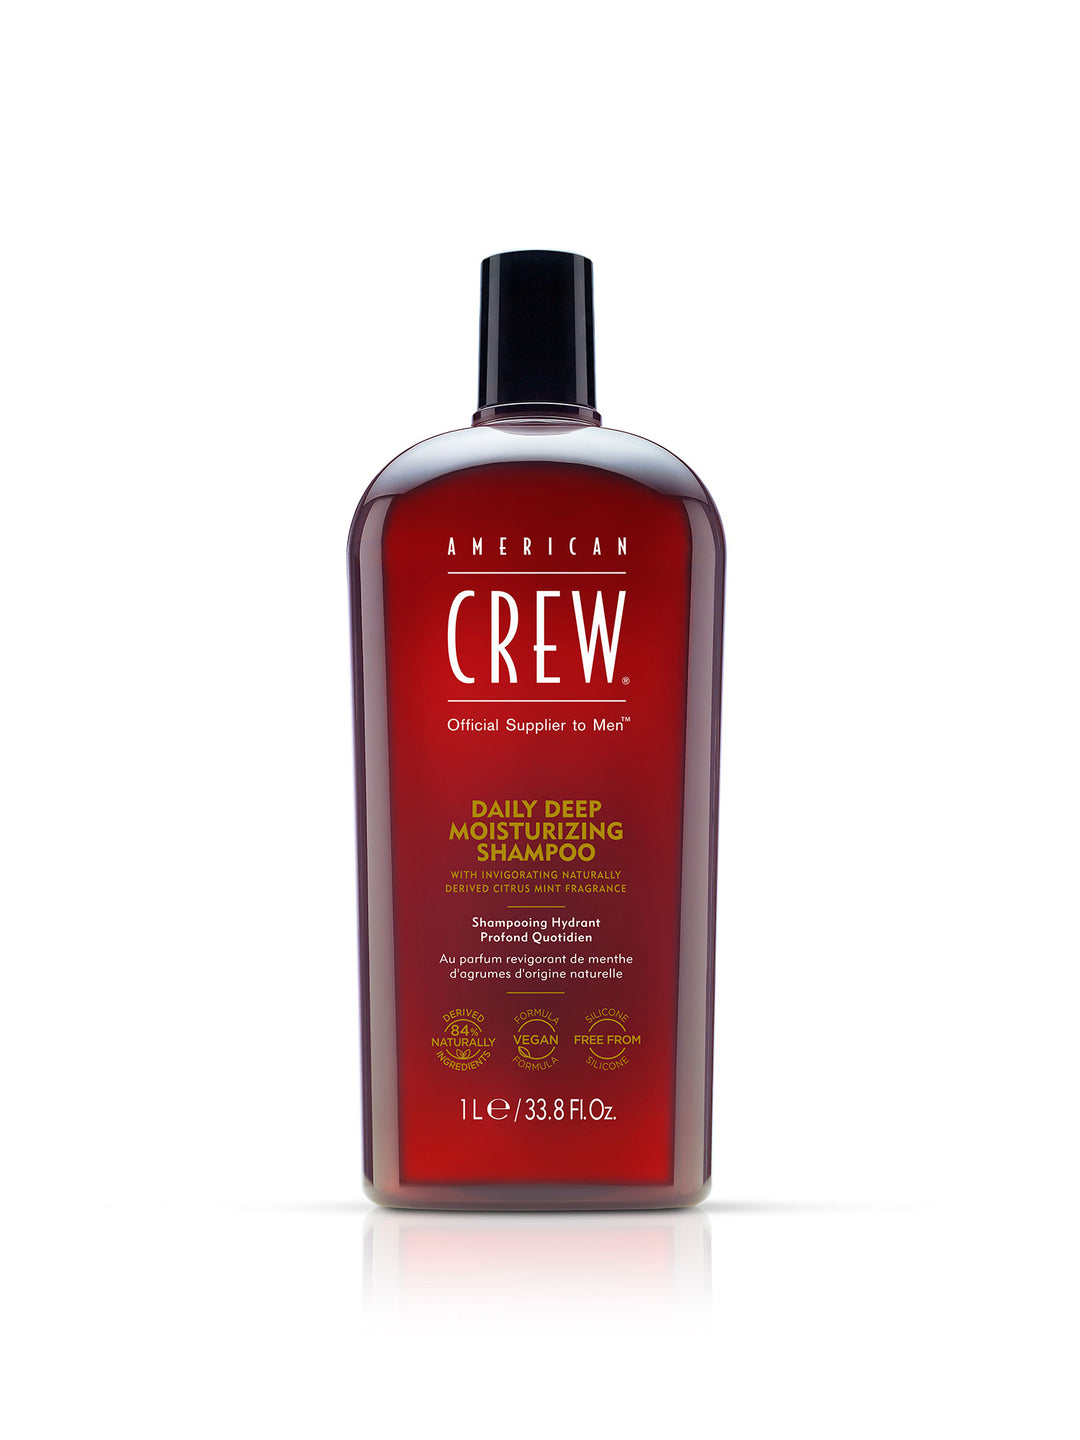 american crew hair recovery thickening szampon